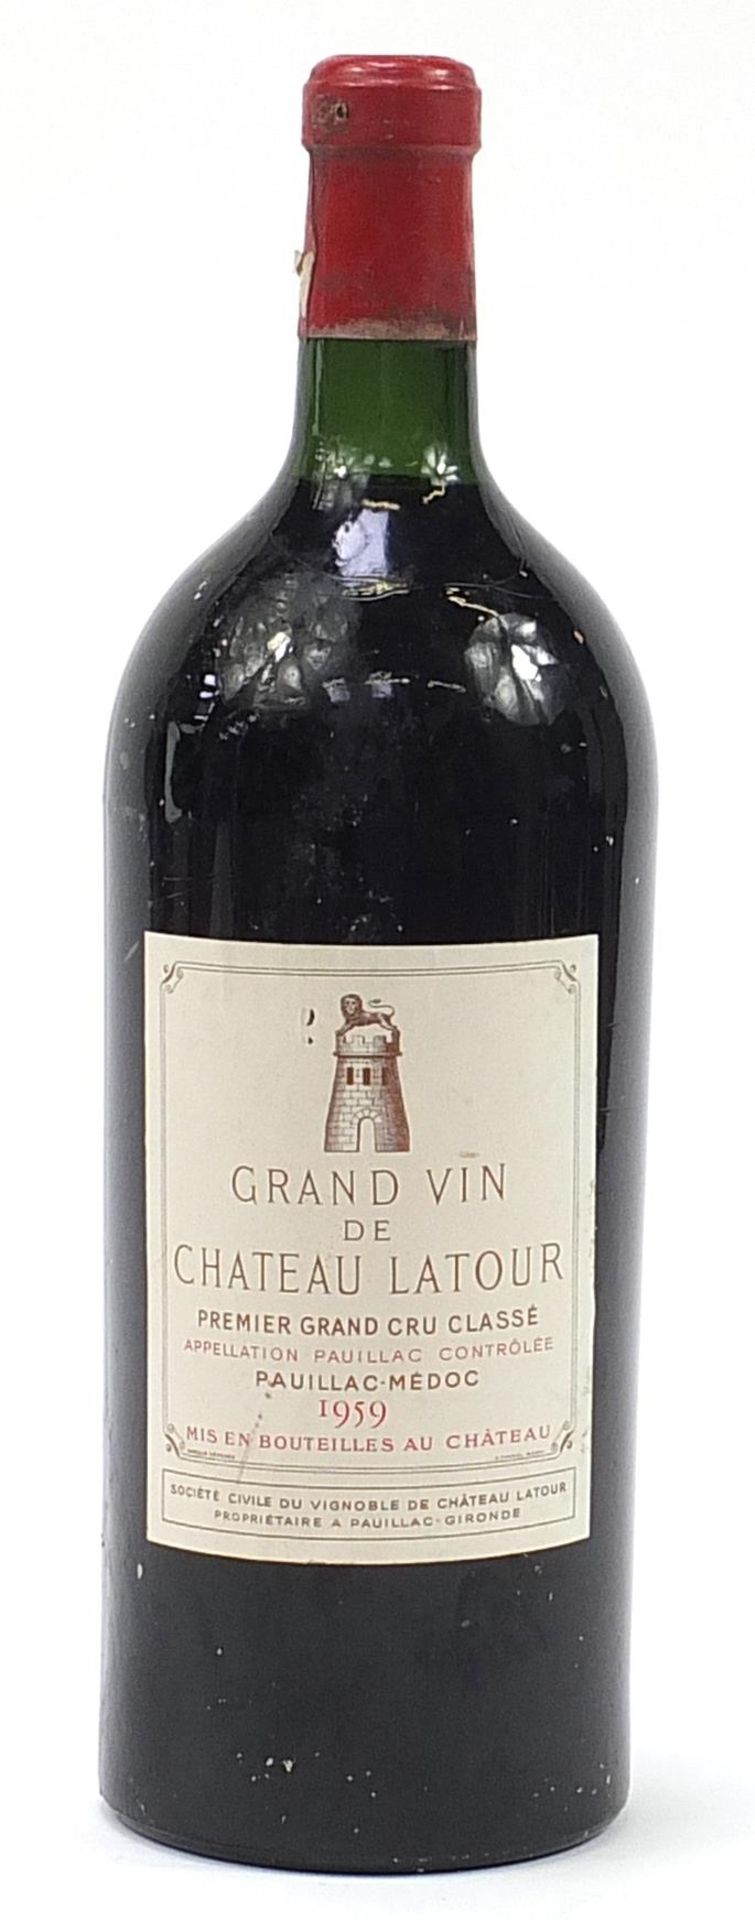 Double-magnum bottle of 1959 Chateau Latour red wine, John Harvey label to the reverse